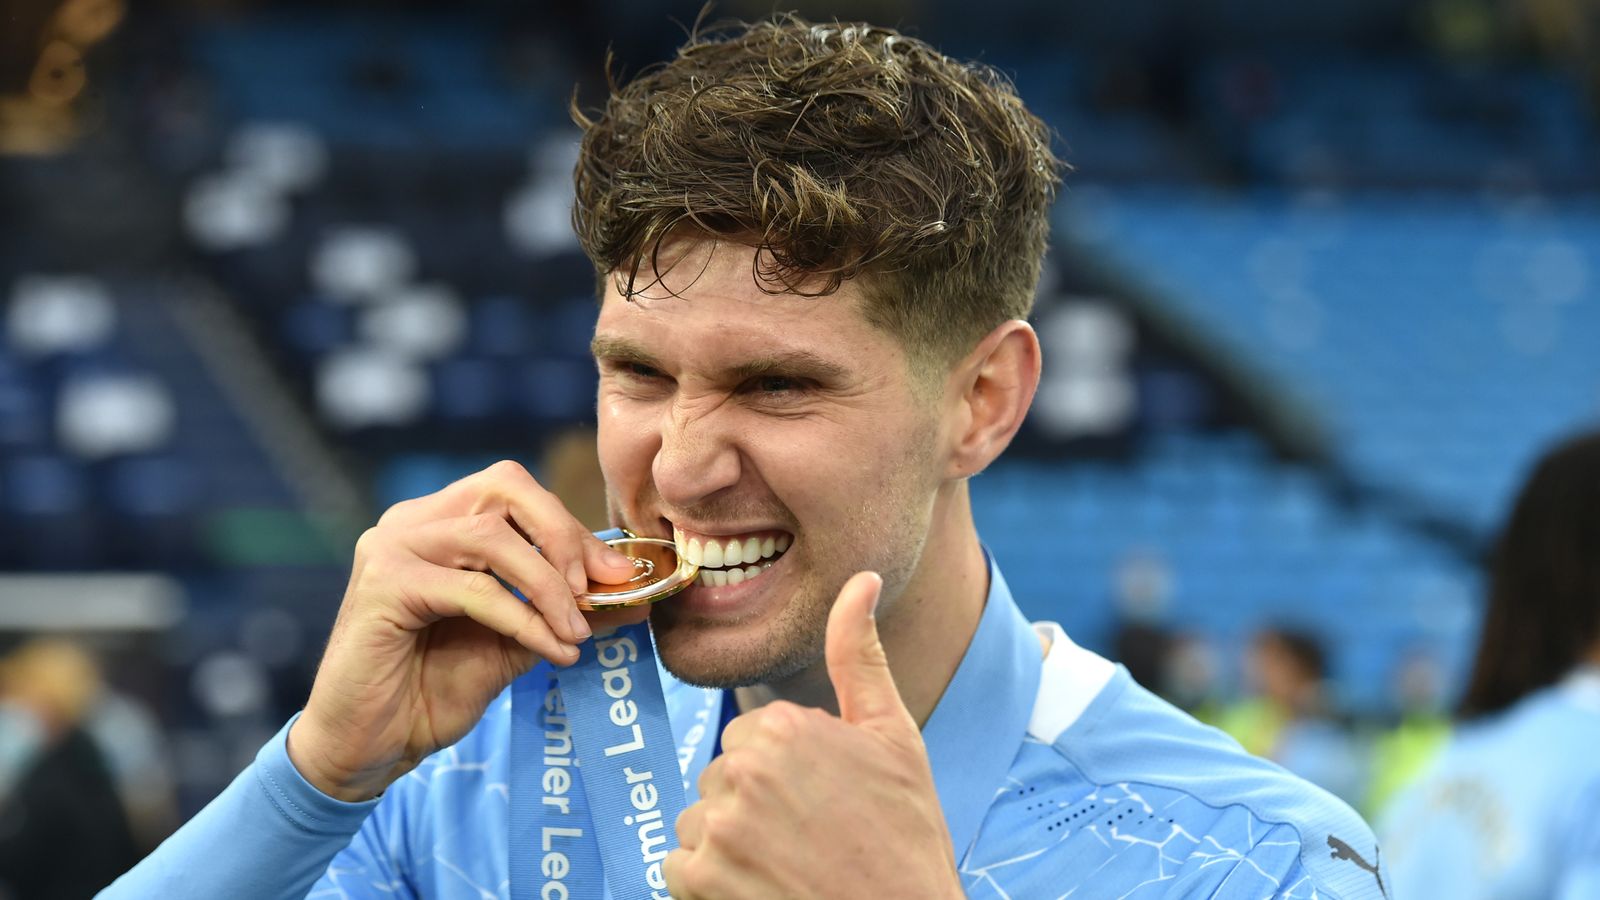 John Stones: Man City defender signs contract extension until 2026